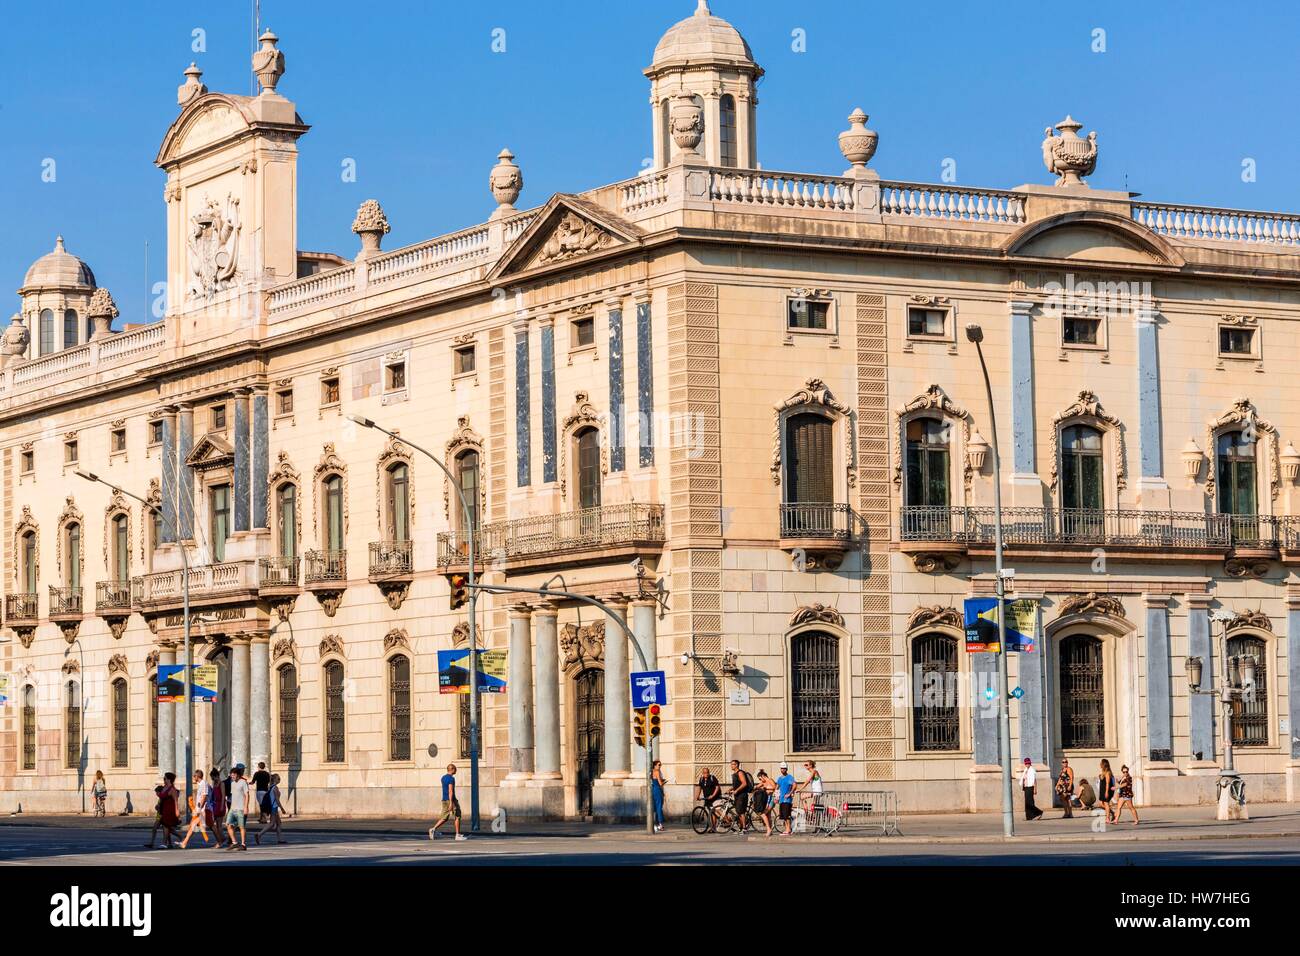 Spain, Catalonia, Barcelona, Plaza del Palau, a former customs (Aduana Vieja) in neoclassical style and built between 1896 and 1902 by Enric Sagnier and Pere Garcia Stock Photo